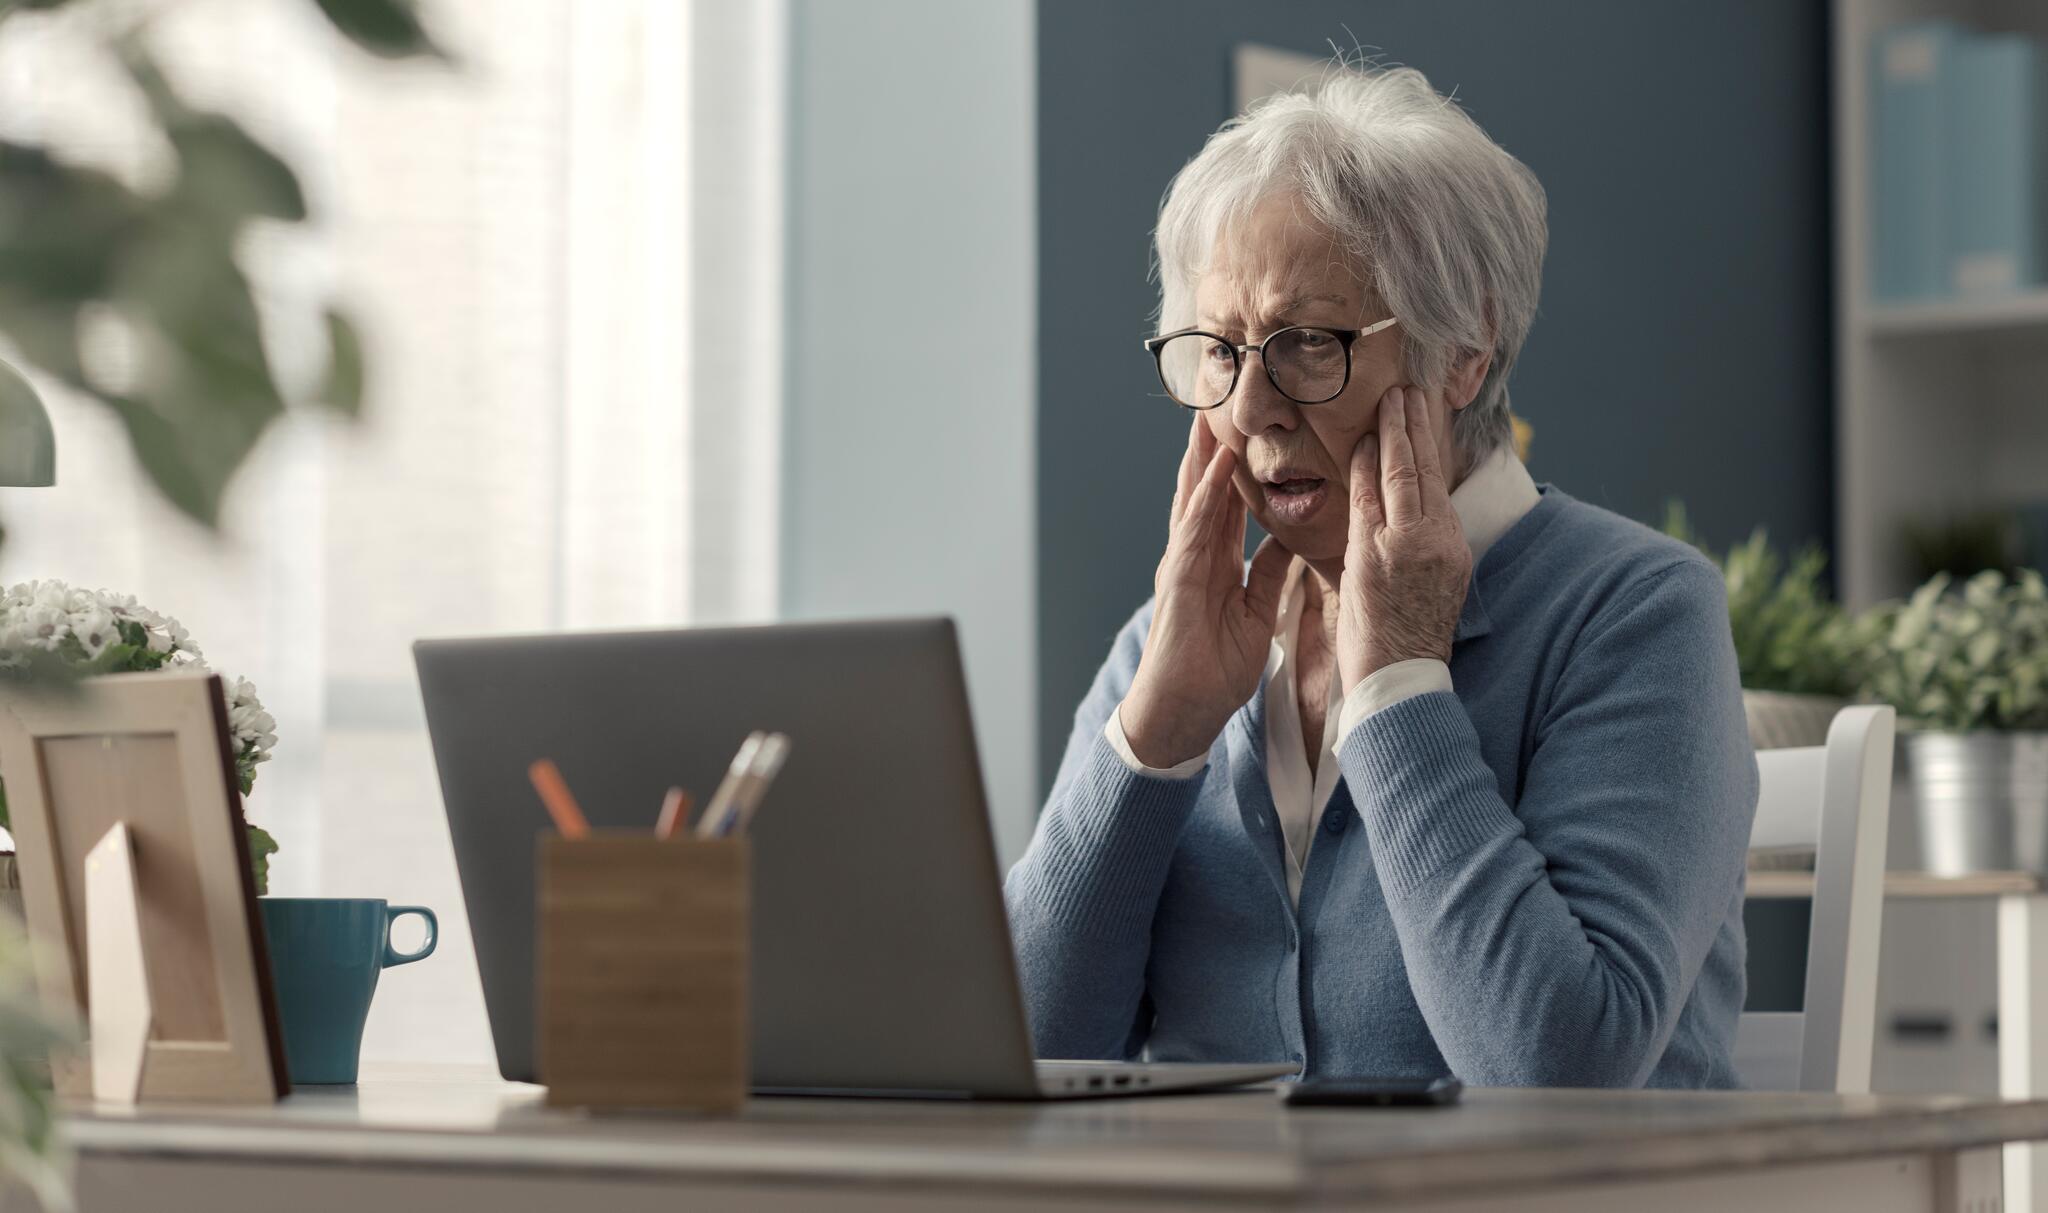 An elderly woman sits in front of a laptop. Her hands frame her face in a look of shock as she gazes at her laptop screen.